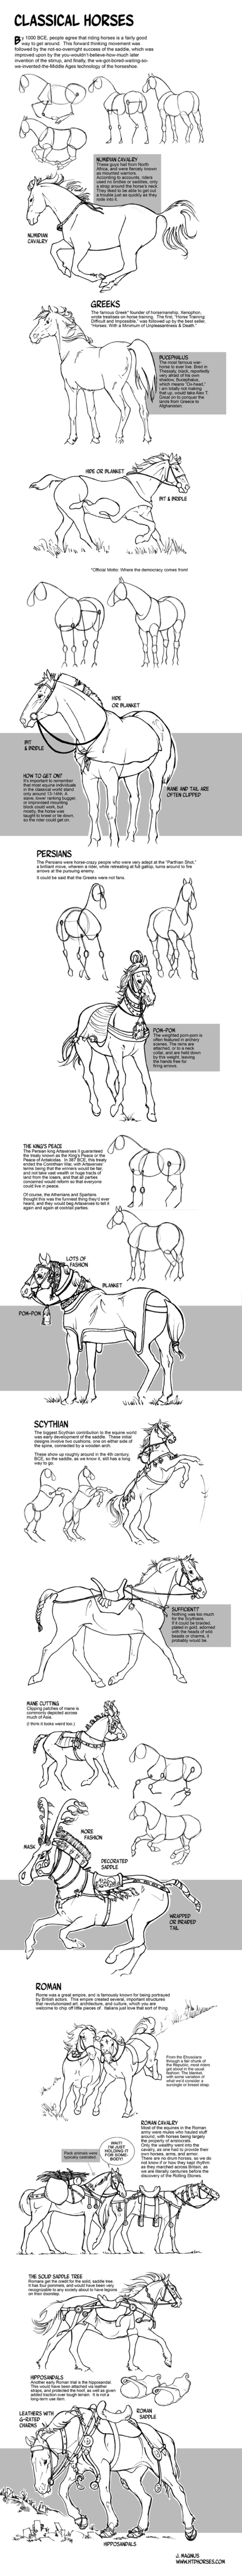 How to Draw Horses of the Classical World | Drawing References and Resources | Scoop.it